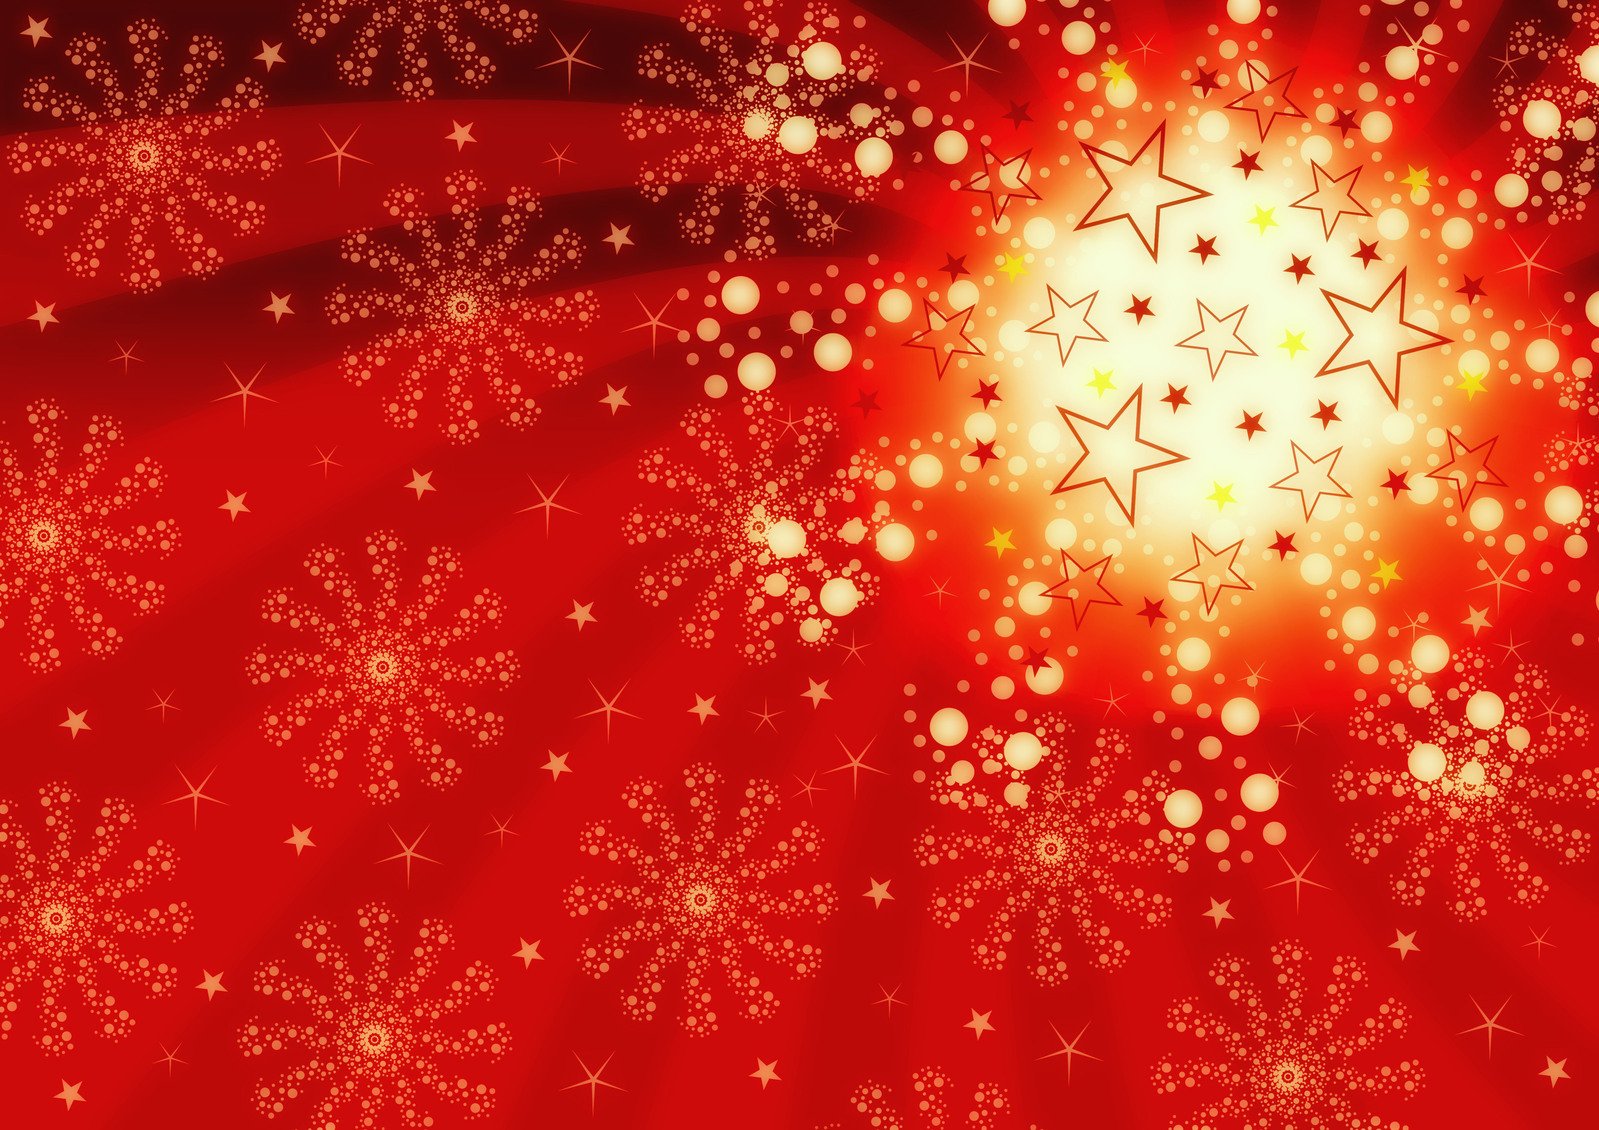 a red wallpaper with many stars in it